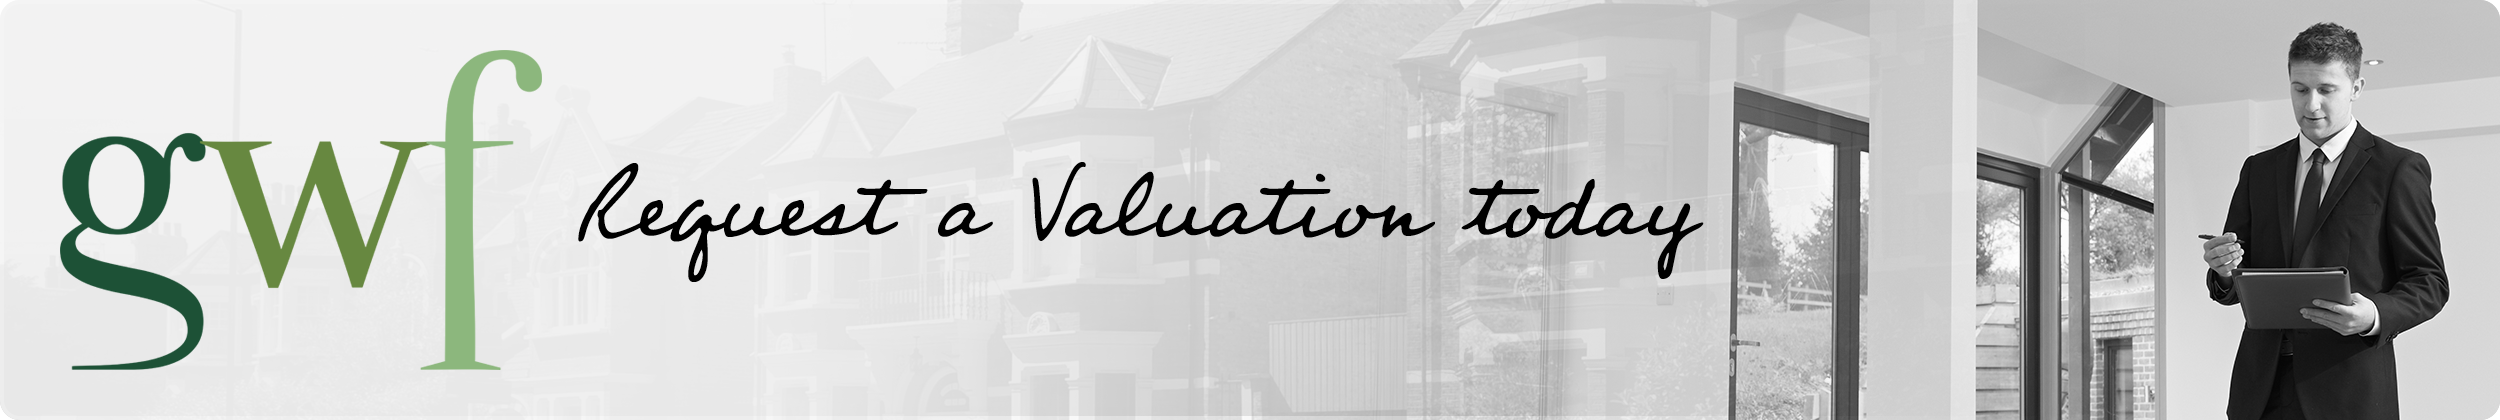 Book a valuation